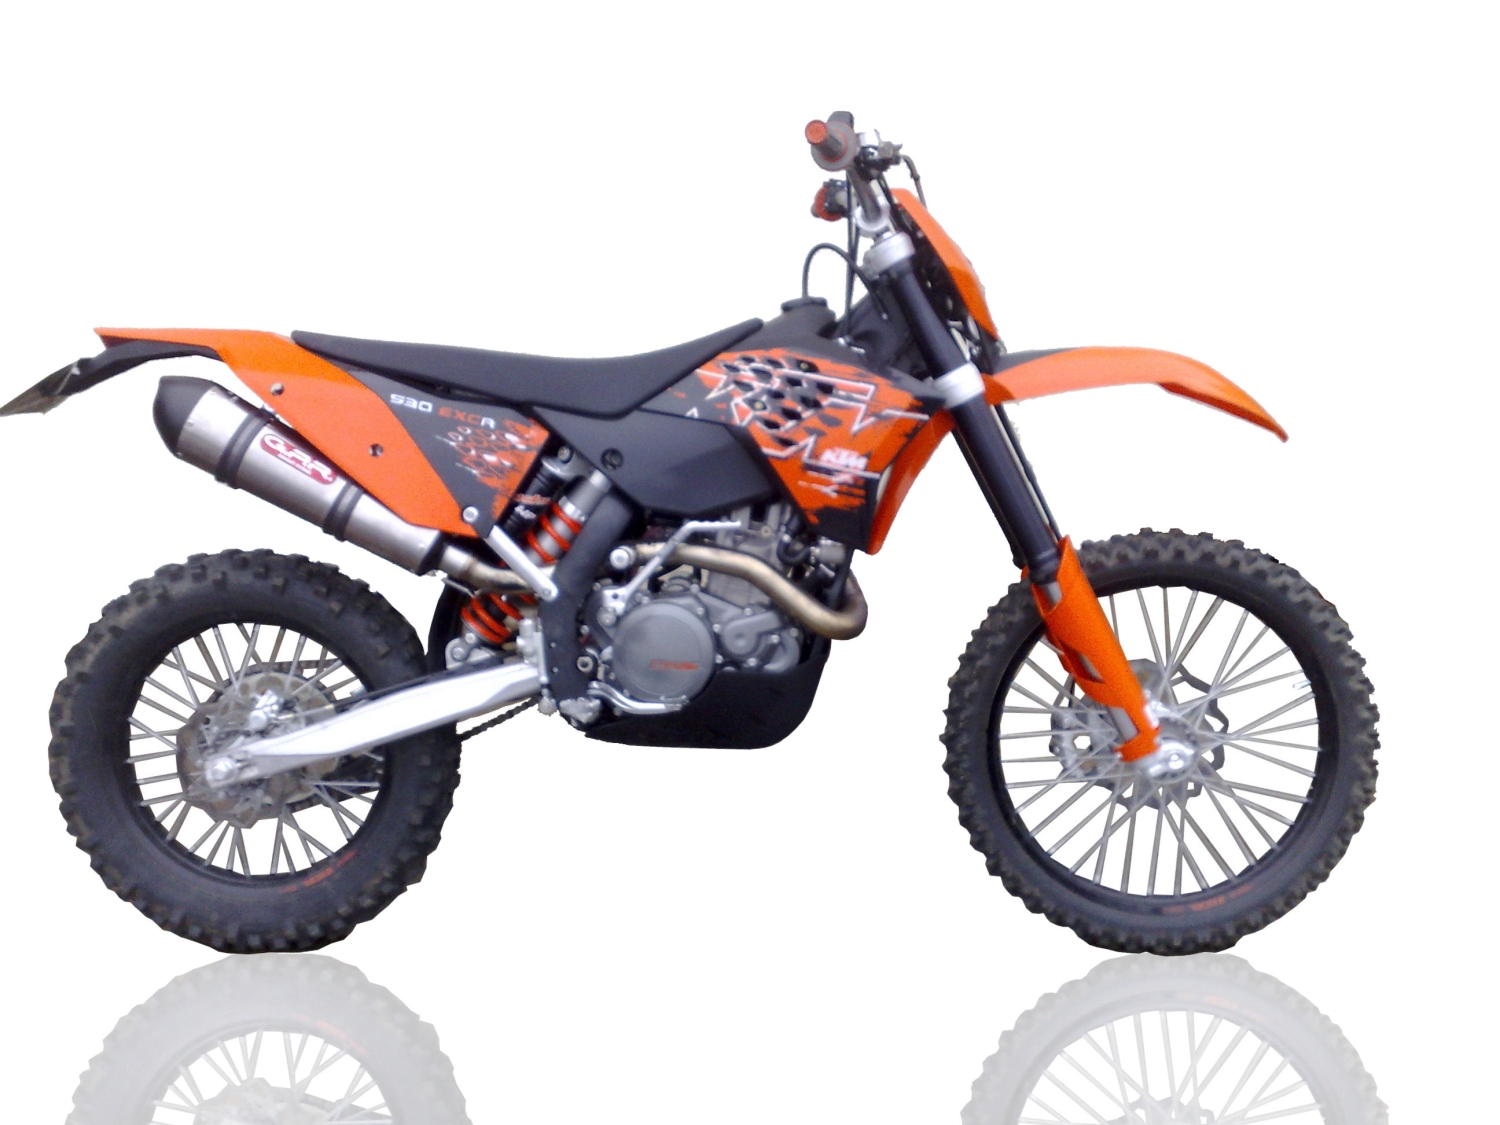 Exhaust system compatible with Ktm 450 EXC 2009-2011, Gpe Ann. titanium, Homologated legal slip-on exhaust including removable db killer and link pipe 